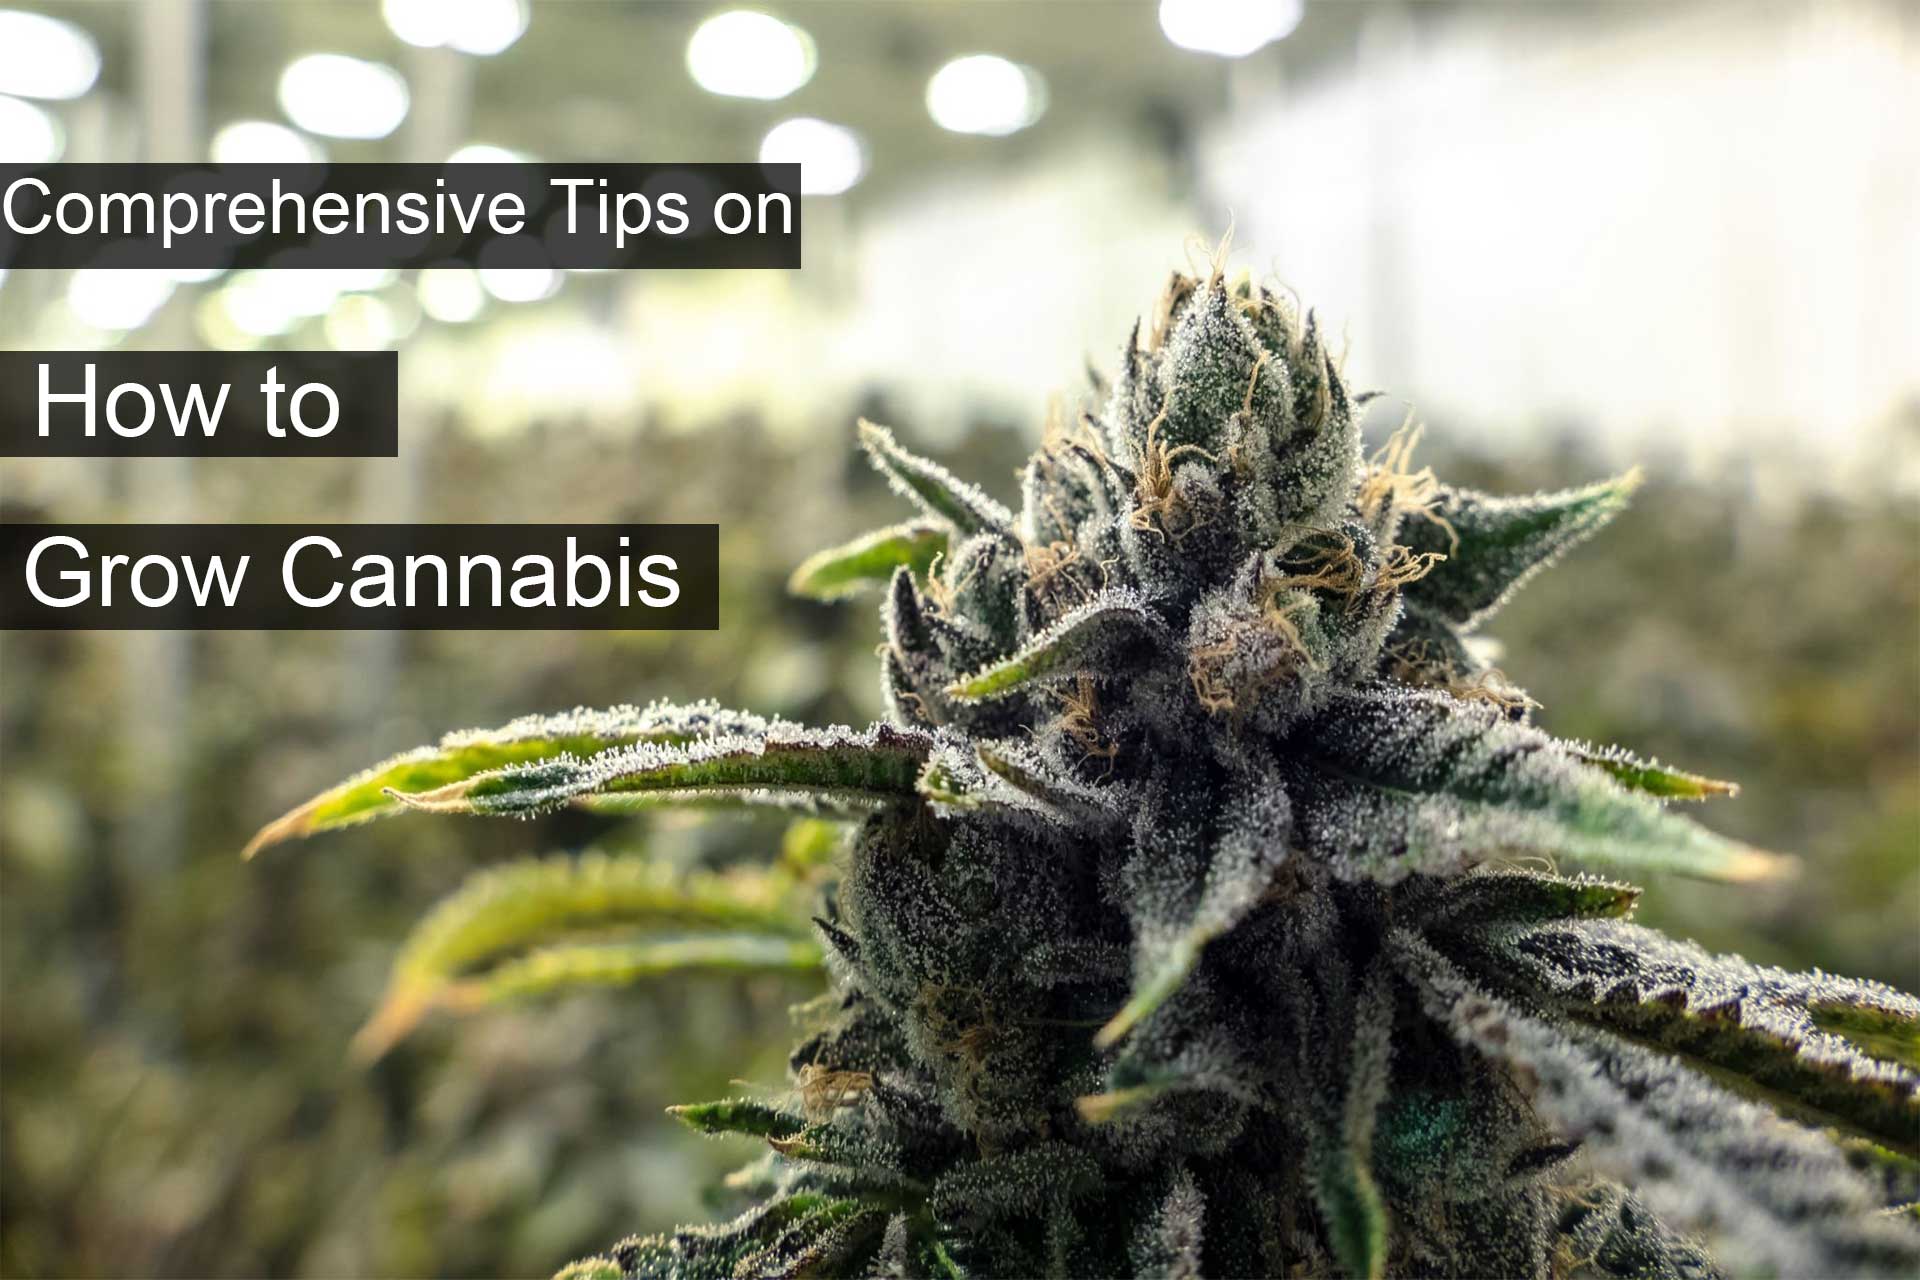 Comprehensive Tips on How to Grow Cannabis